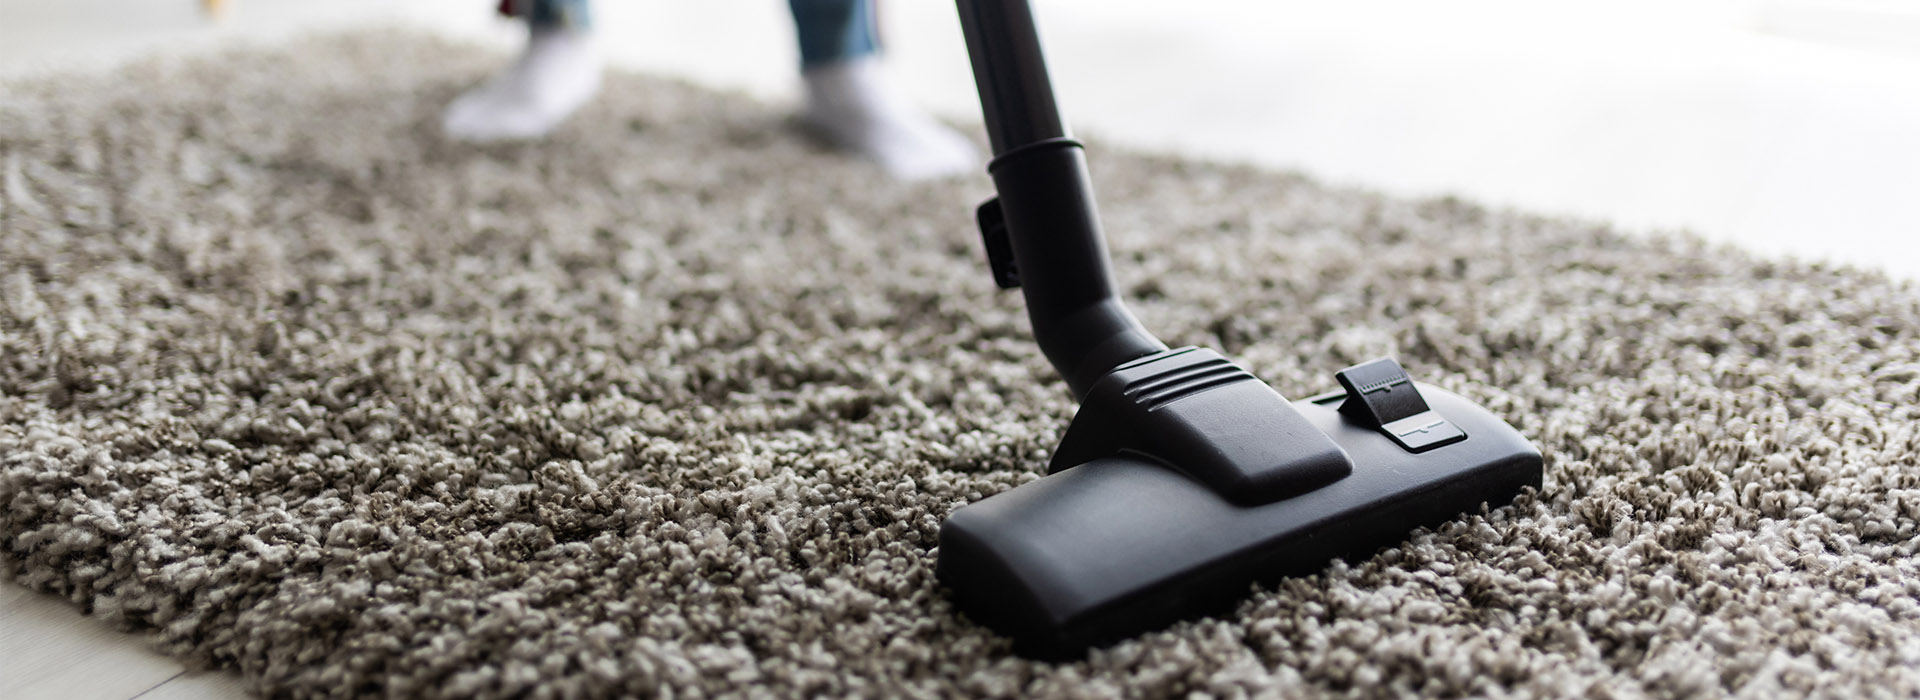 The Benefits of Organic Carpet Cleaning: A Healthier Choice for Your Home | Organic Carpet Cleaning Sydney